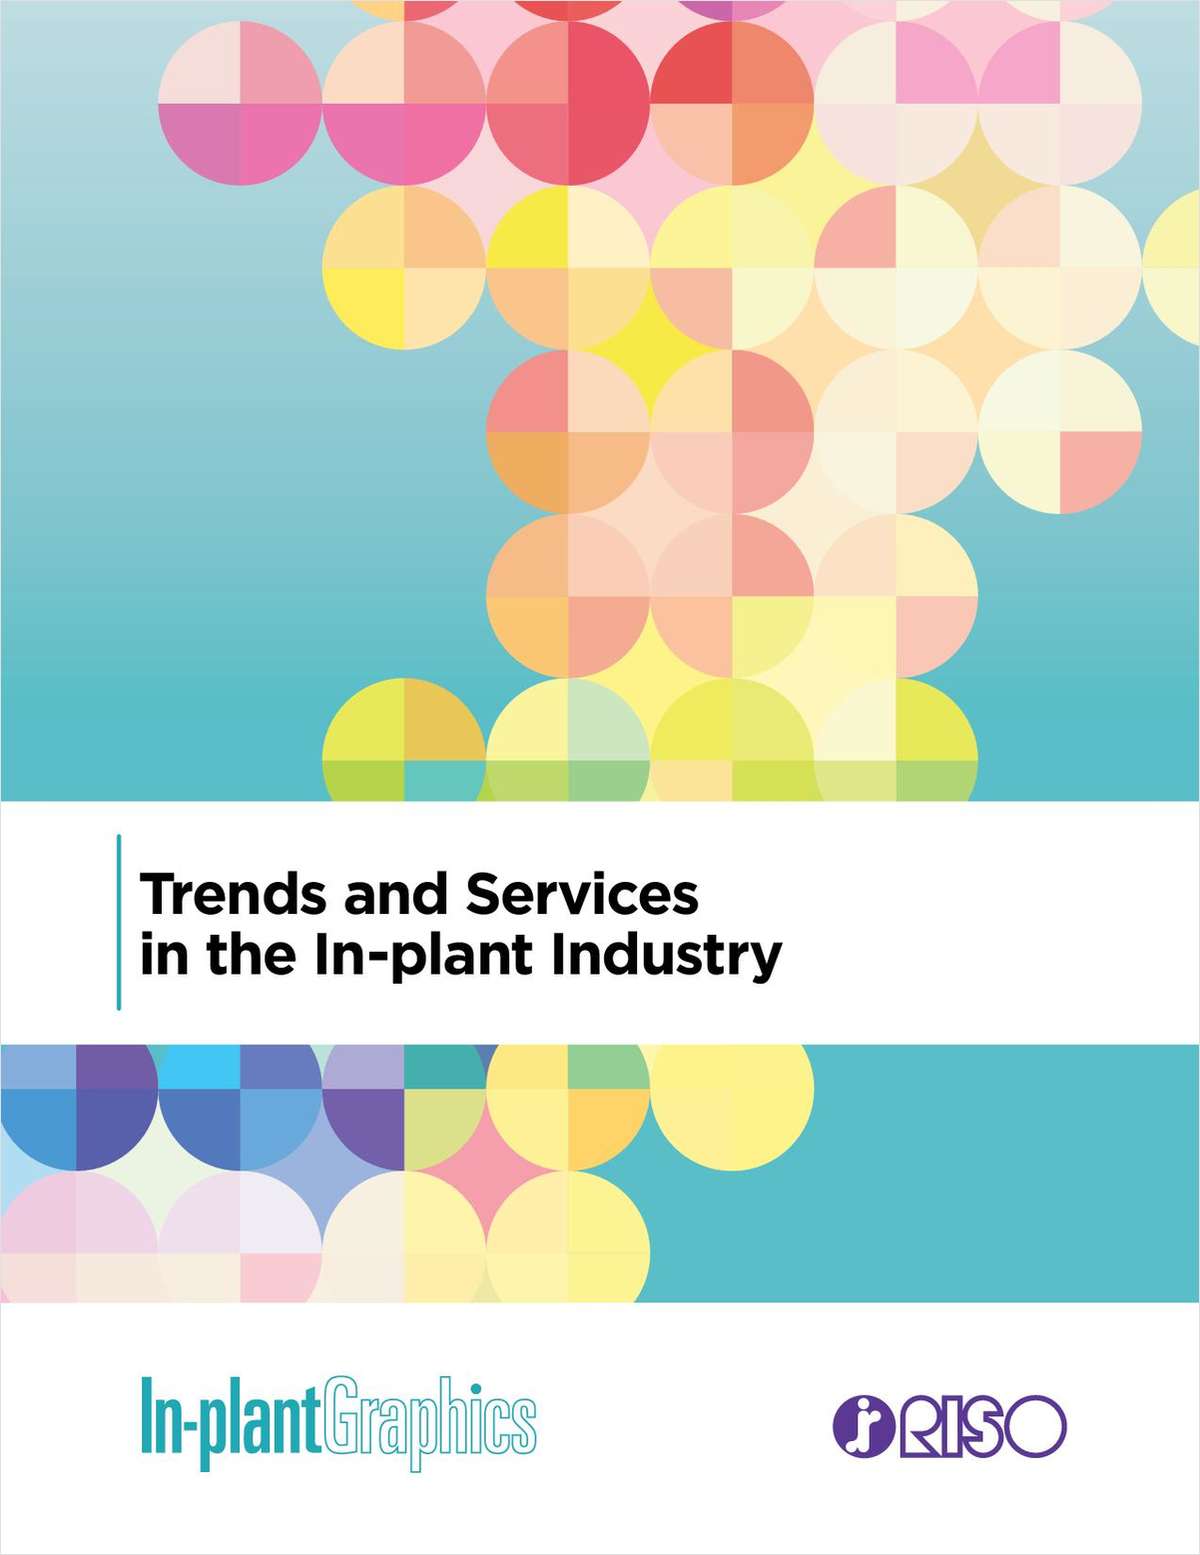 Trends and Services in the In-plant Industry